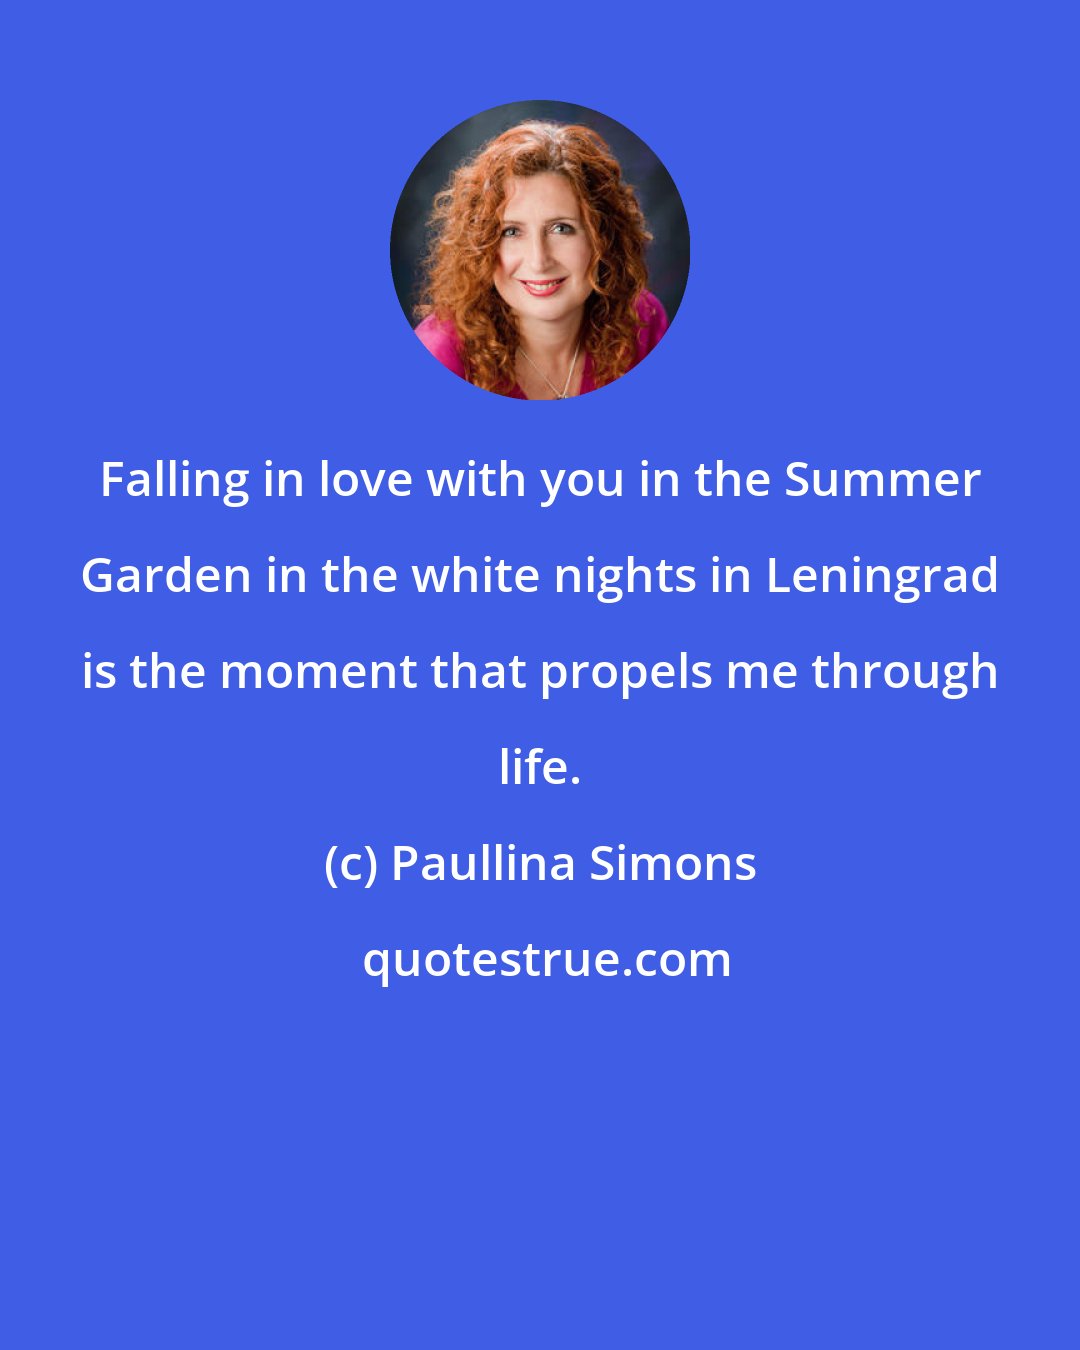 Paullina Simons: Falling in love with you in the Summer Garden in the white nights in Leningrad is the moment that propels me through life.